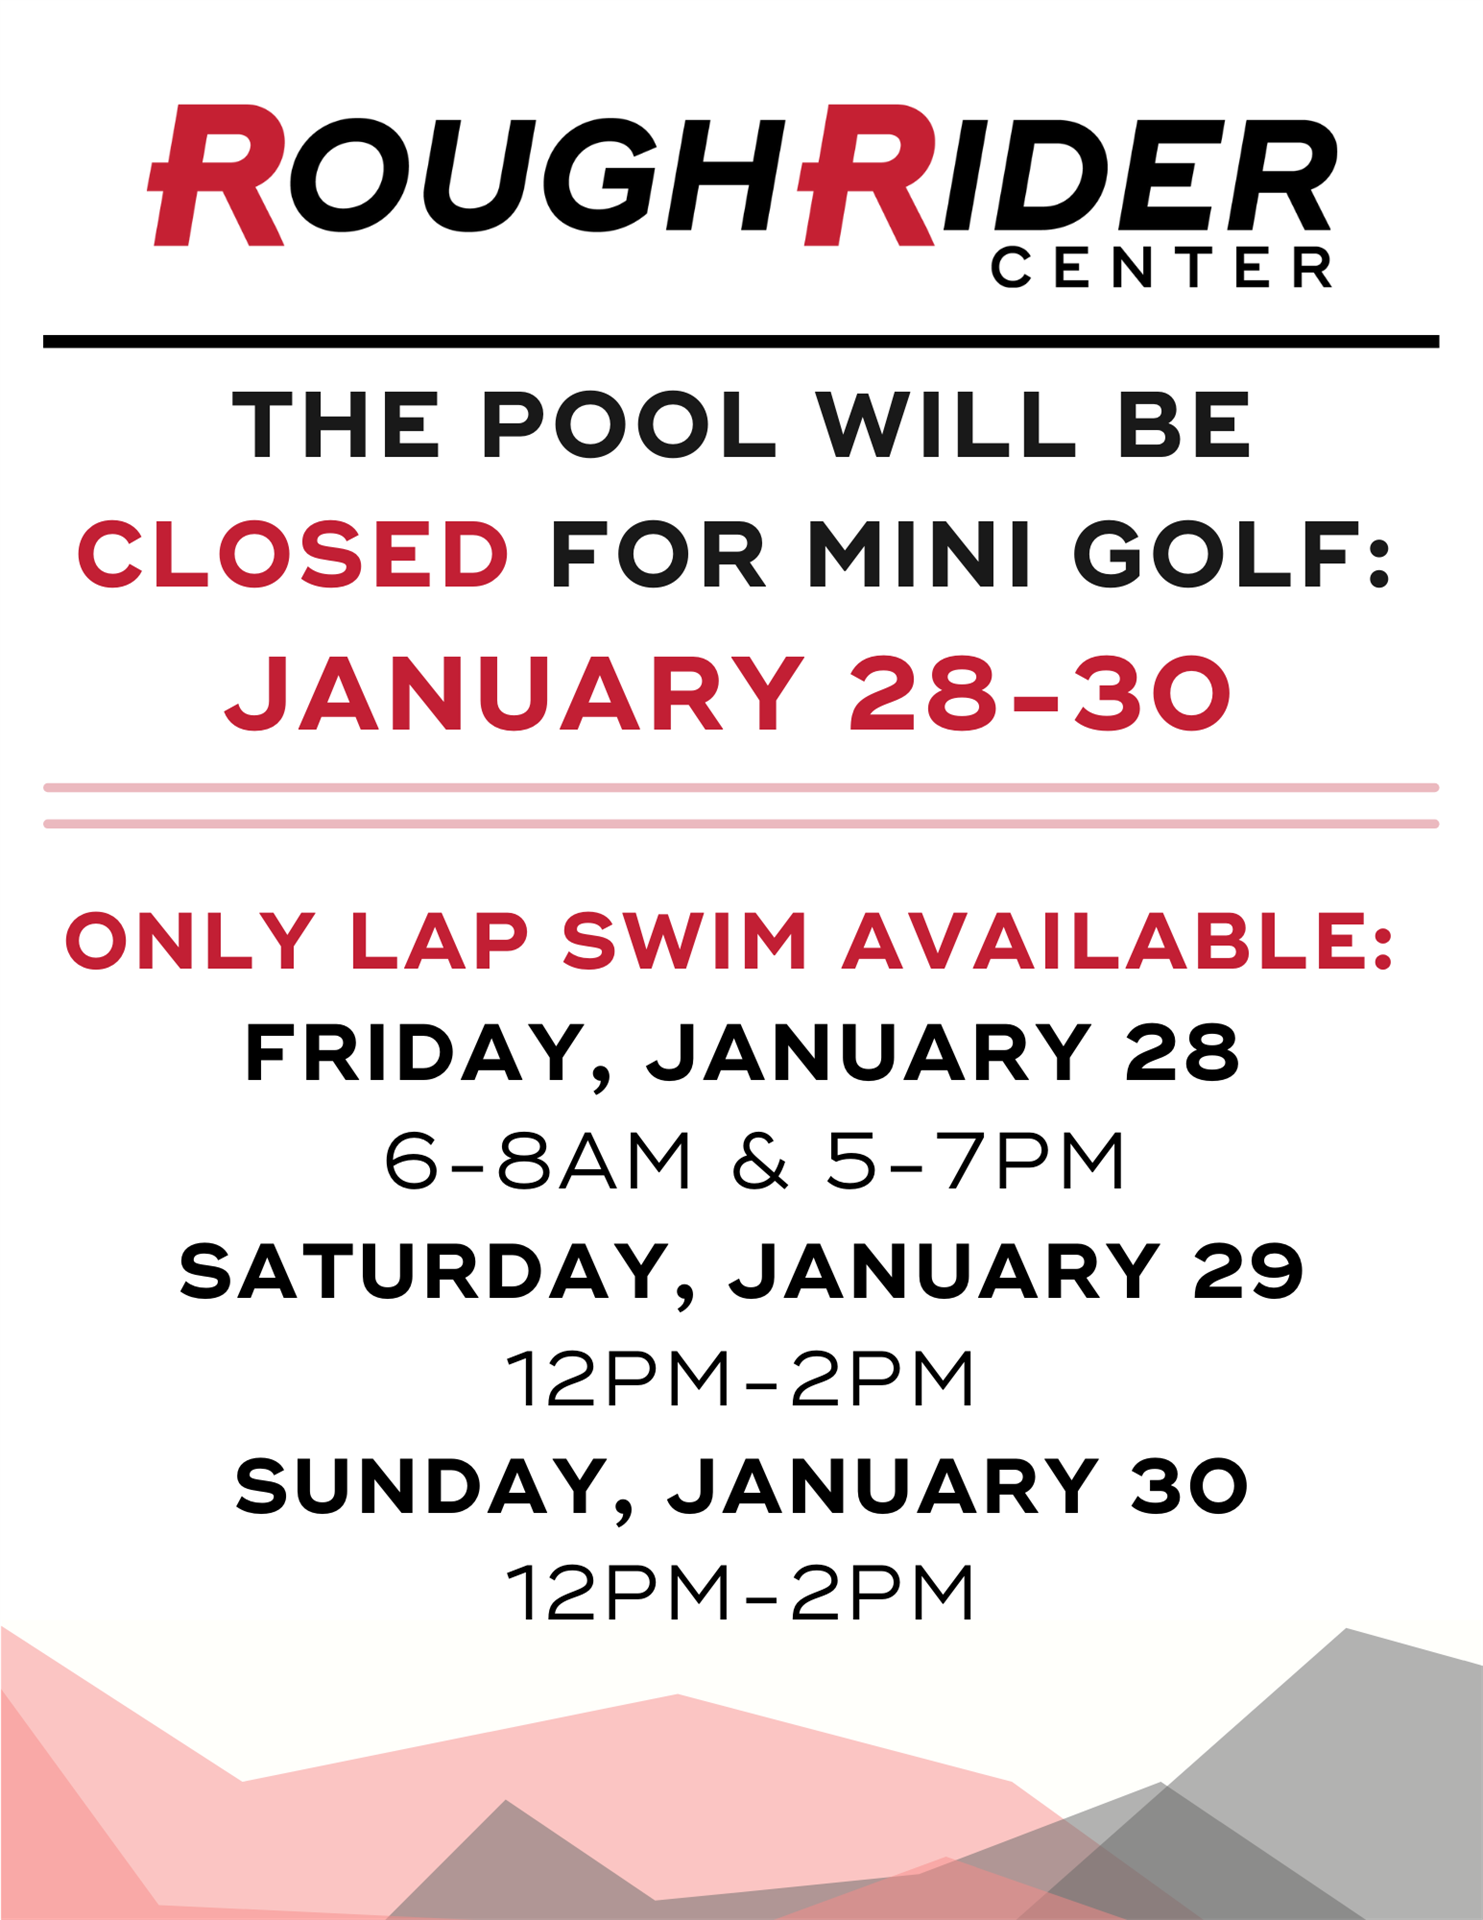 INDOOR POOL WILL BE CLOSED JANUARY 28-30, LAP SWIM STILL AVAILABLE